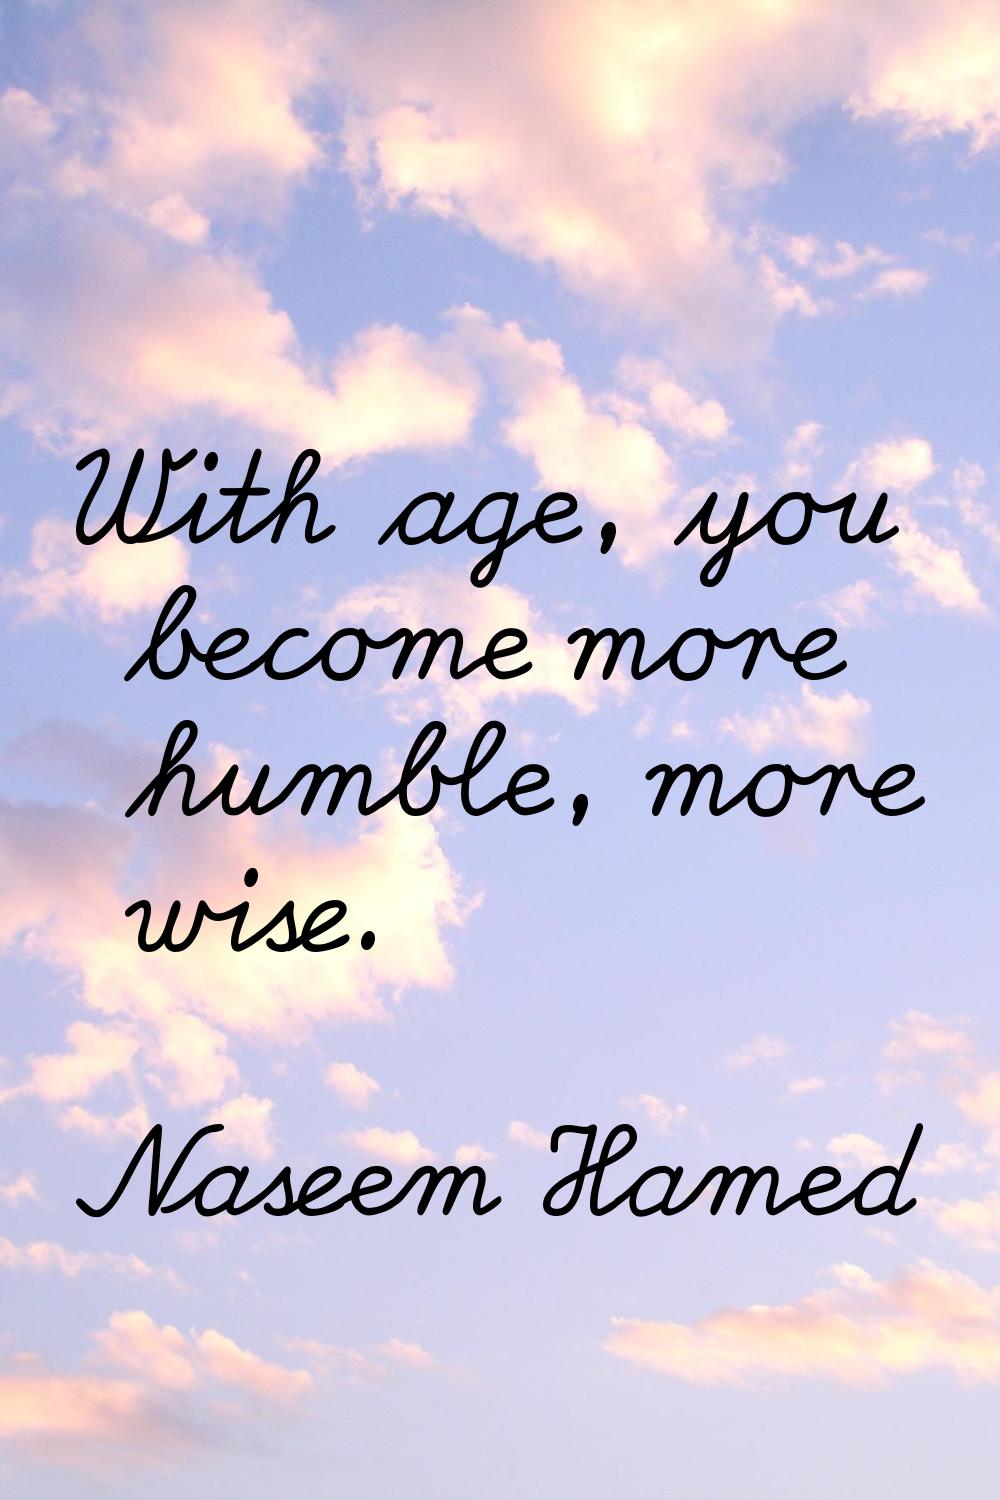 With age, you become more humble, more wise.